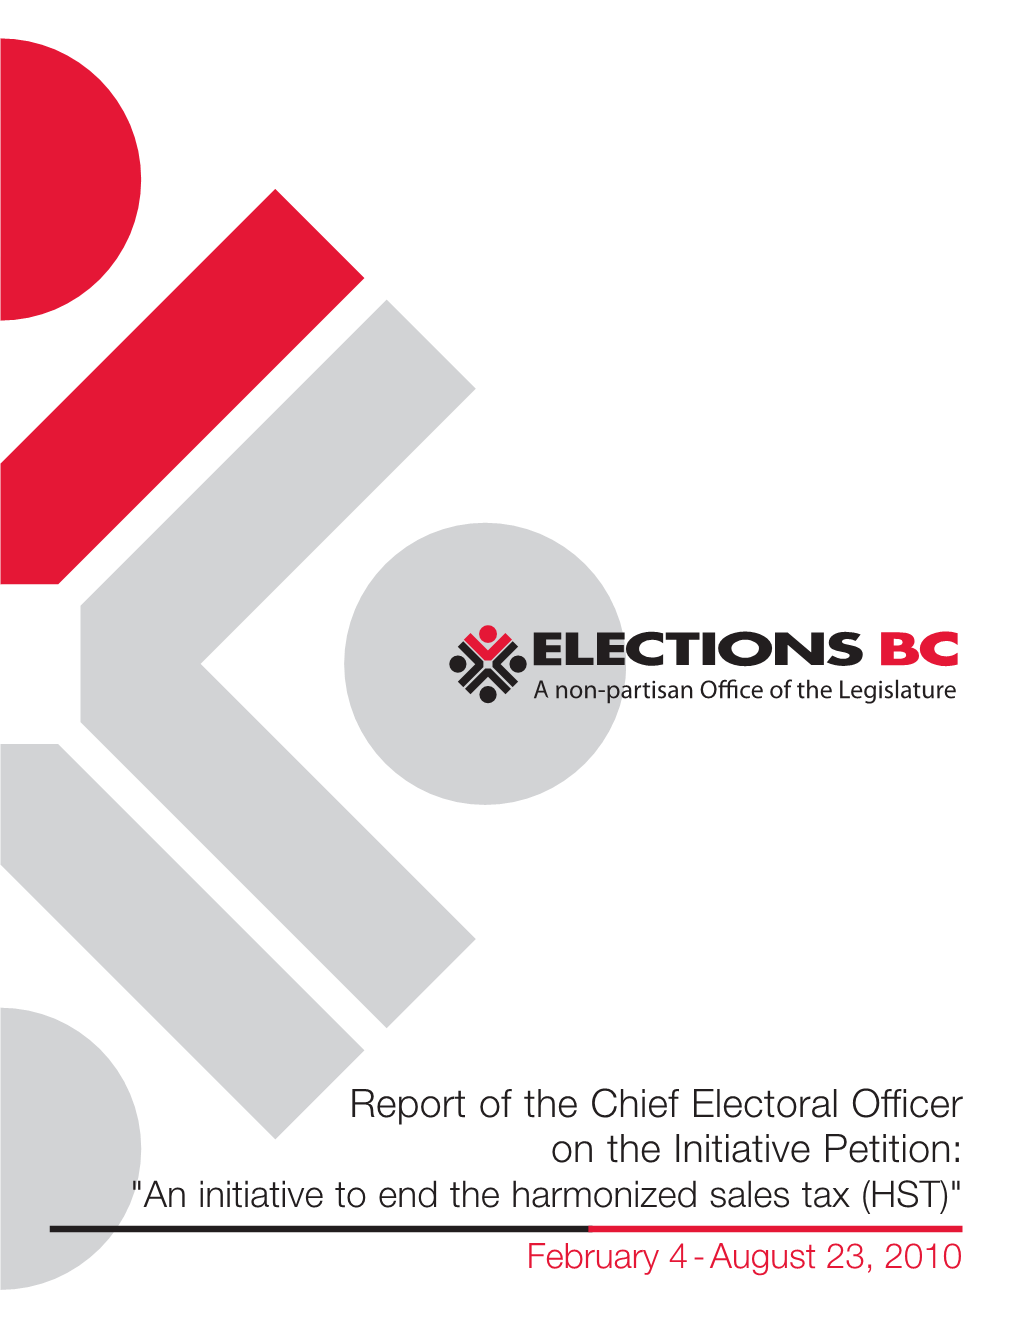 Report of the Chief Electoral Officer on the Initiative Petition: "An Initiative to End the Harmonized Sales Tax (HST)" 836 (10/10) February 4 - August 23, 2010